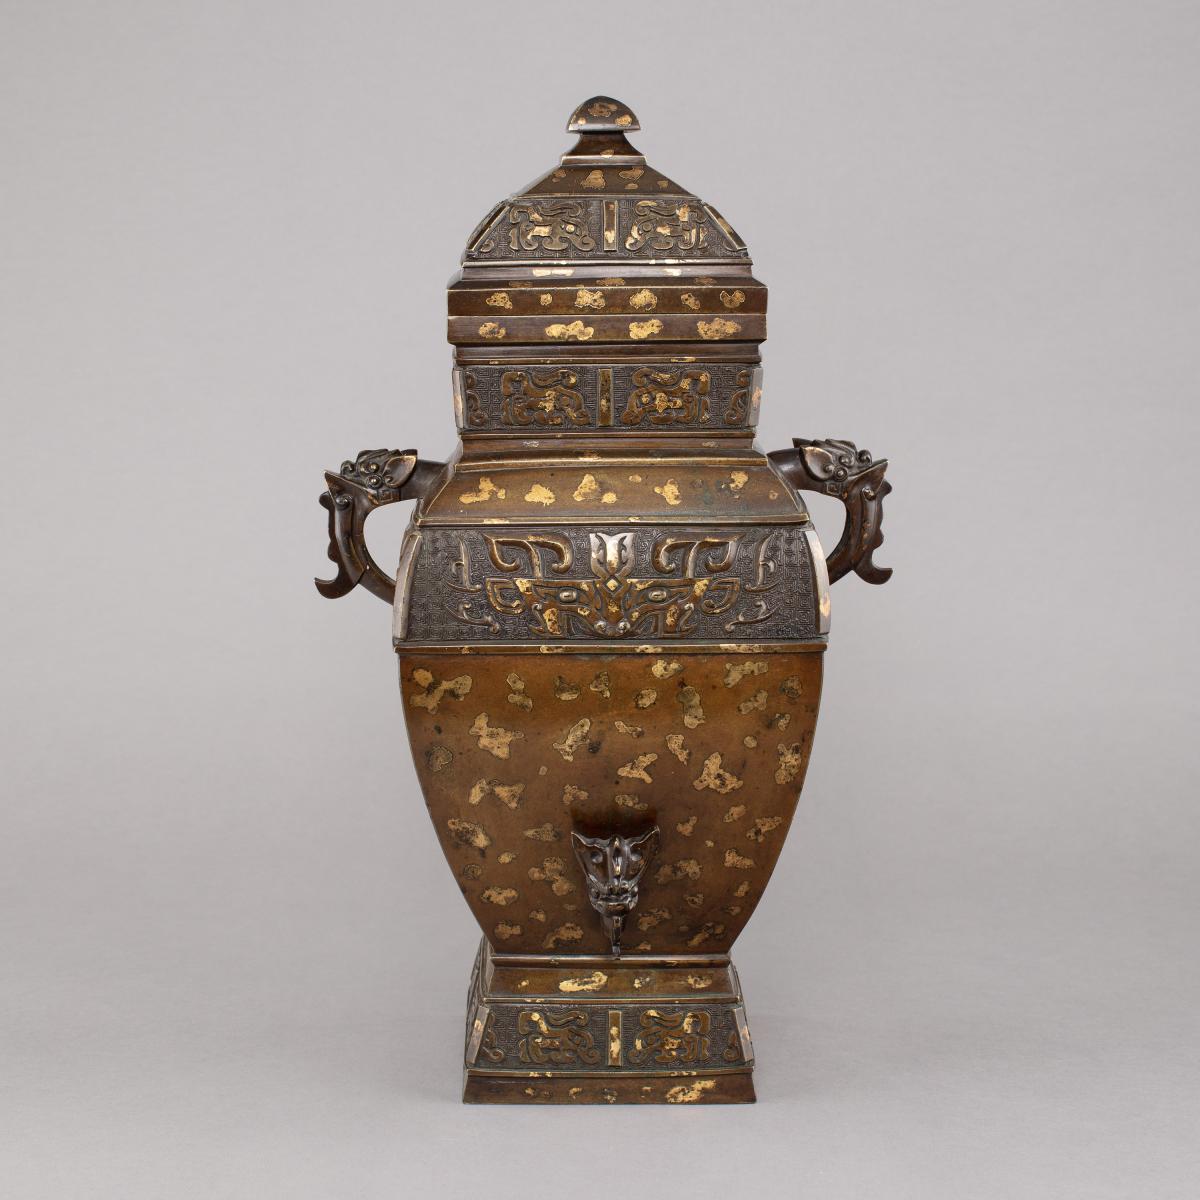 Chinese large gold-splashed bronze vase and cover of archaic zun form, Late Ming/early Qing, 17th century